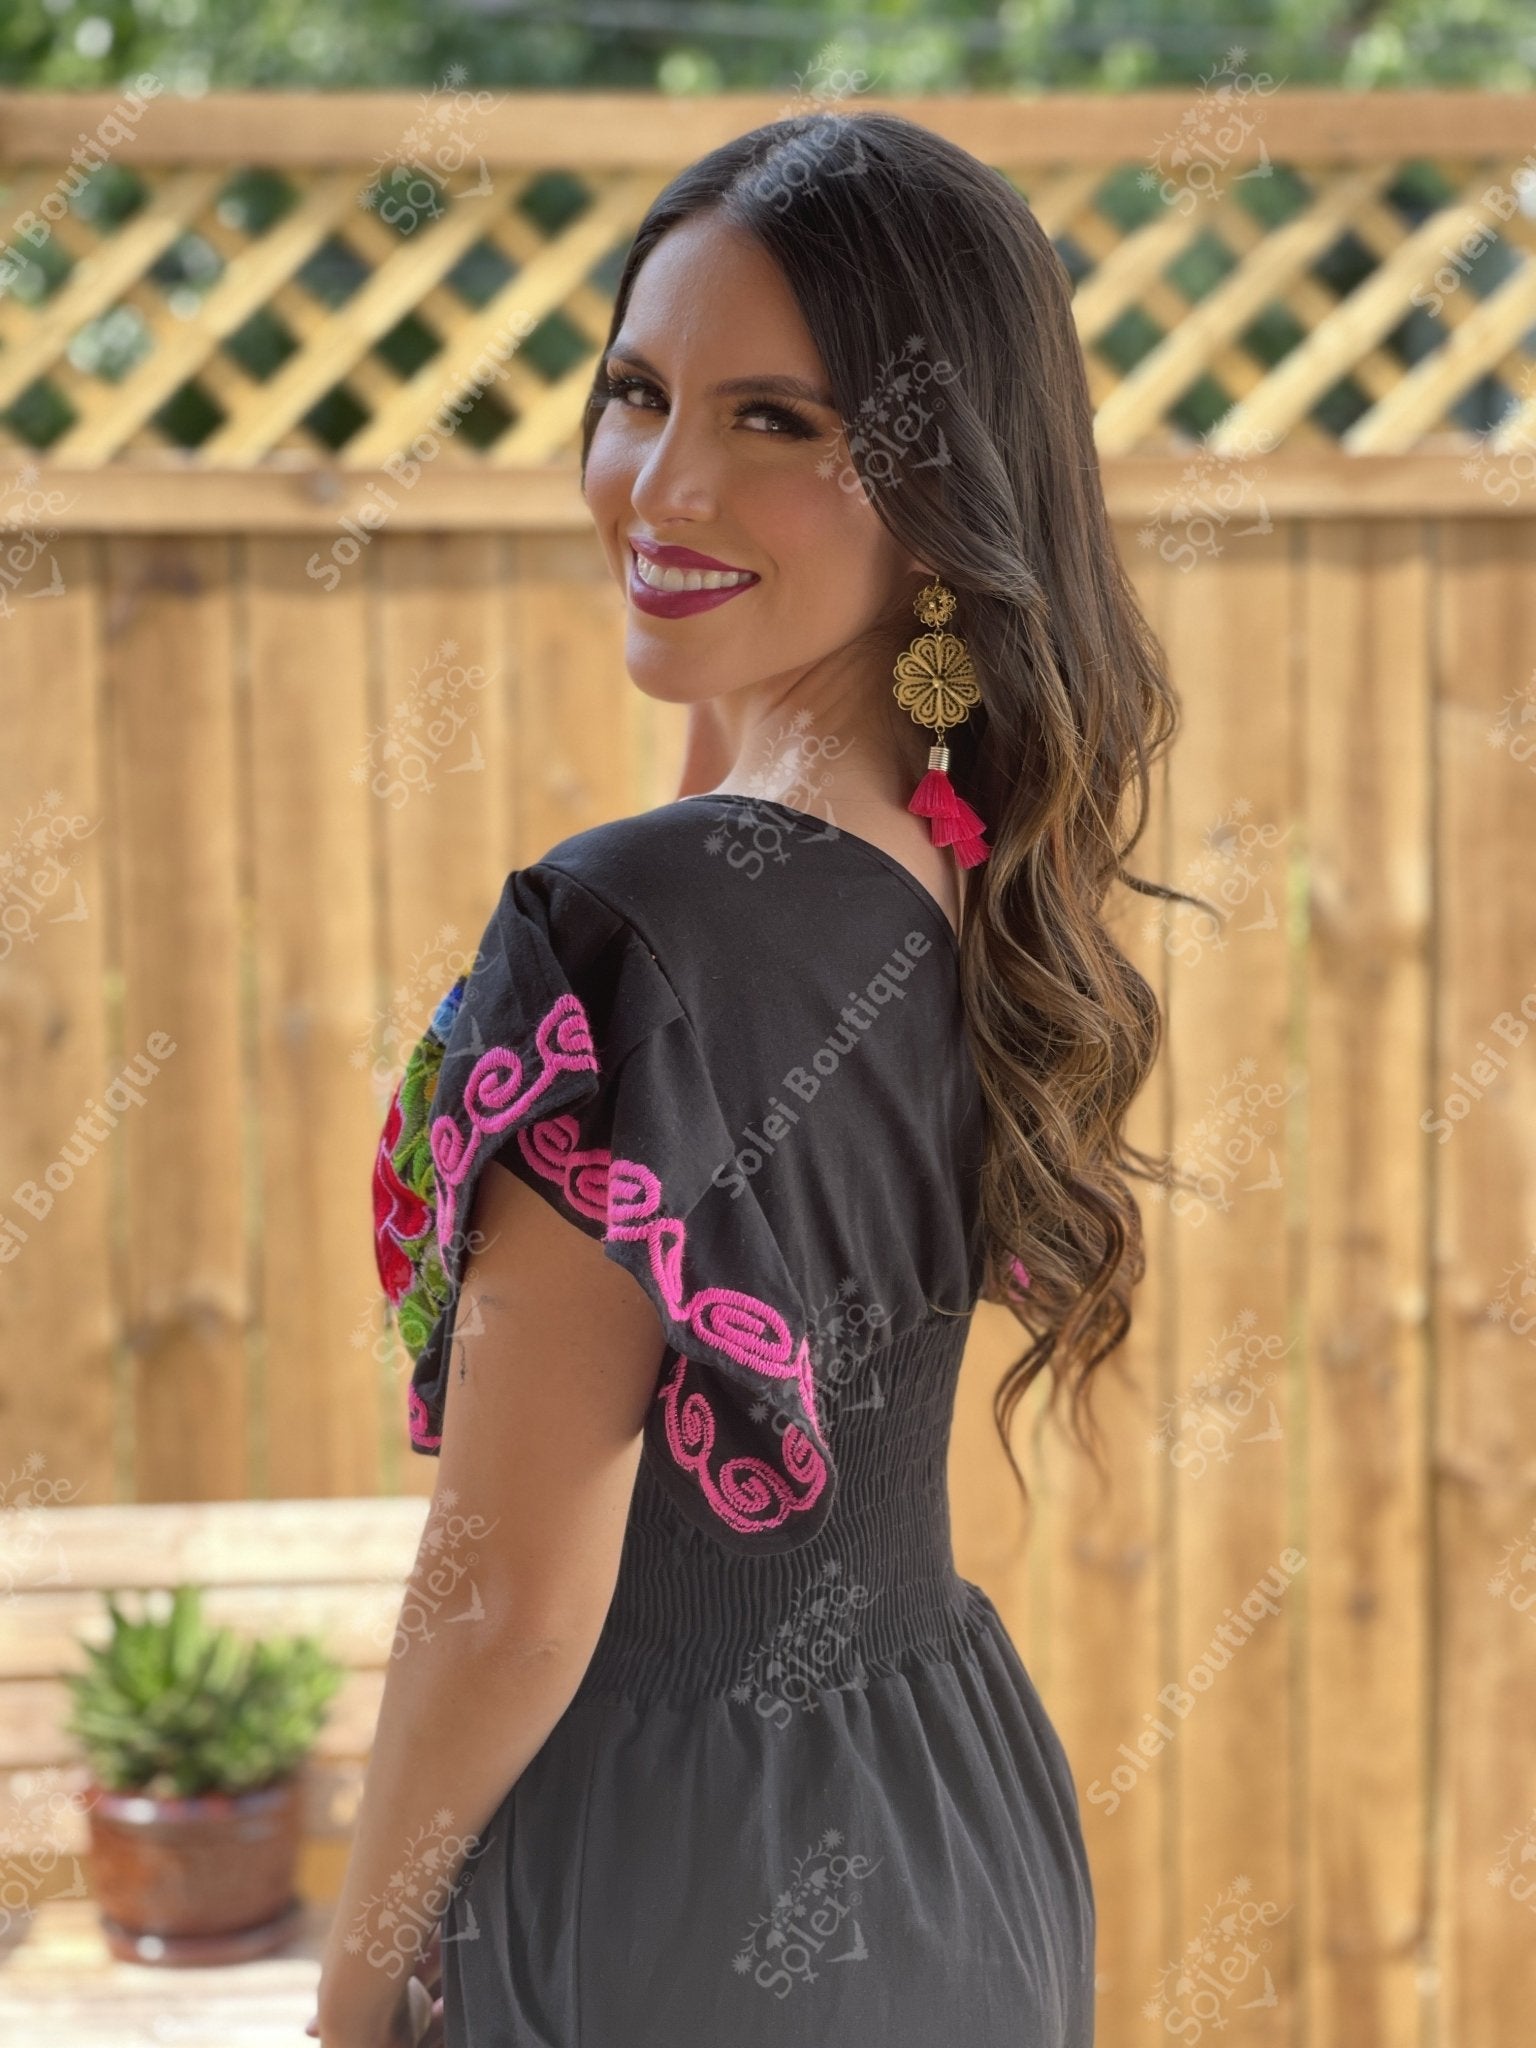 Butterfly Sleeve Romper. Mexican Floral Embroidered Romper - Solei Store